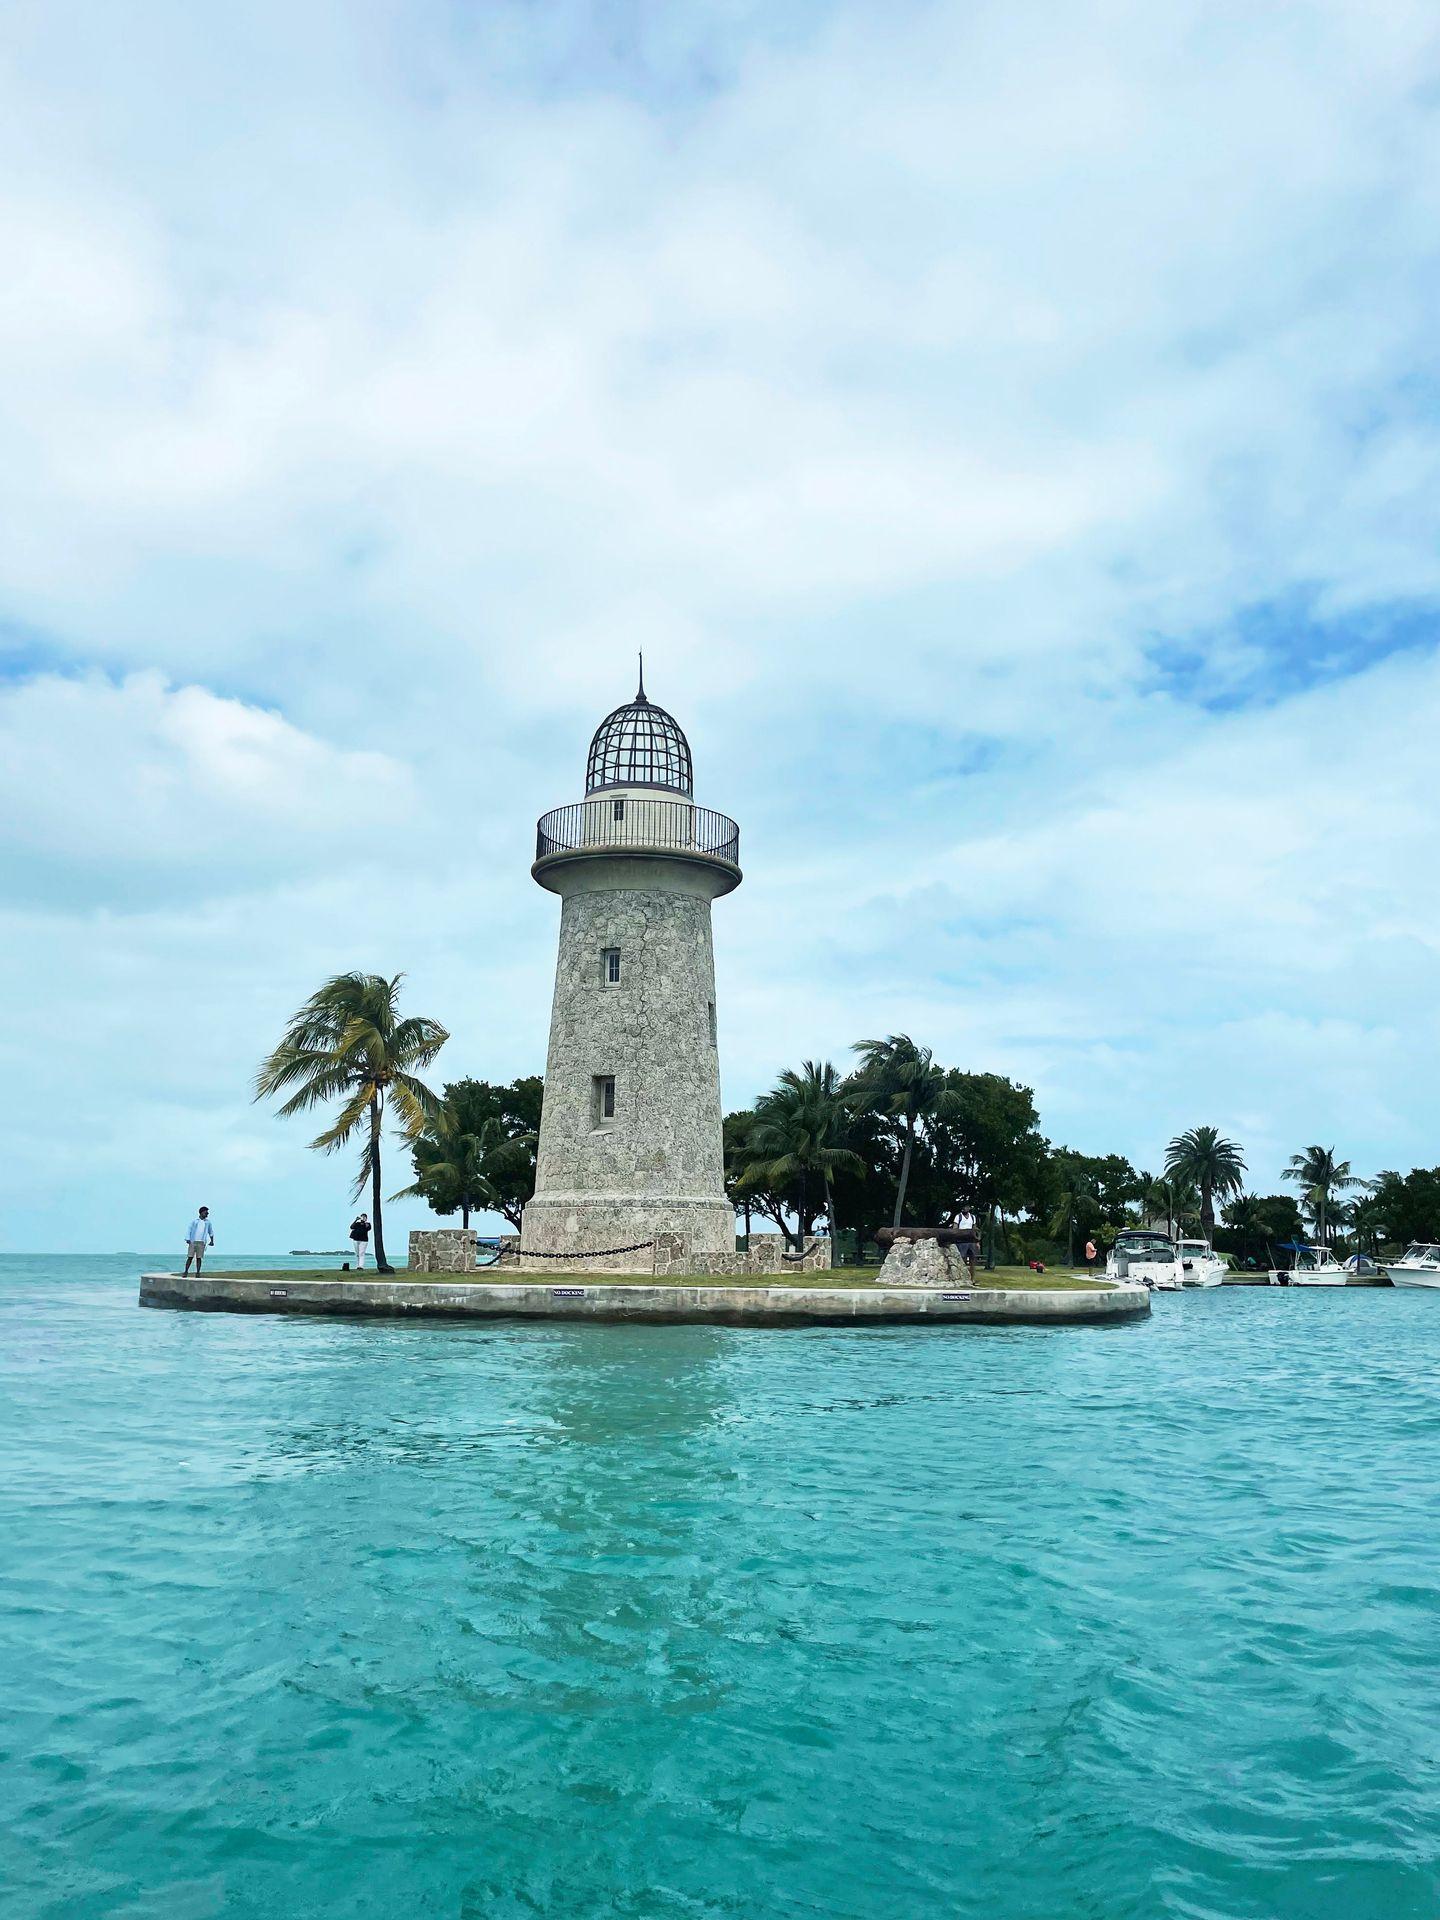 A view of the Boca Chita lighthouse from the water. The lighthouse is made of gray stone and there is a viewing balcony at the top. It is surrounded by palm trees and the ocean water in the foreground is aqua blue.